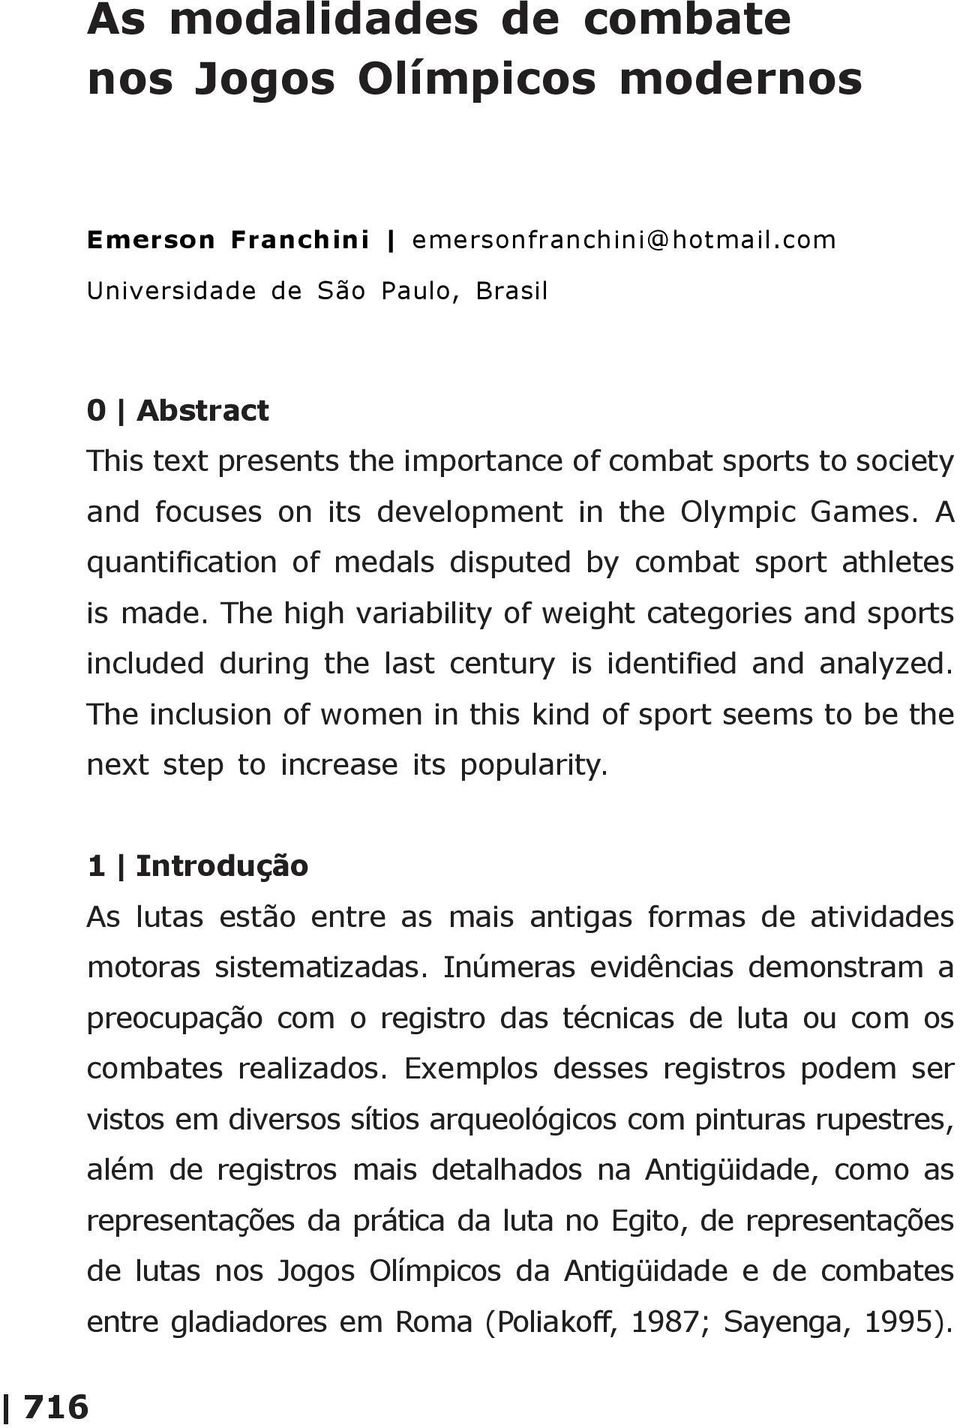 A quantification of medals disputed by combat sport athletes is made. The high variability of weight categories and sports included during the last century is identified and analyzed.